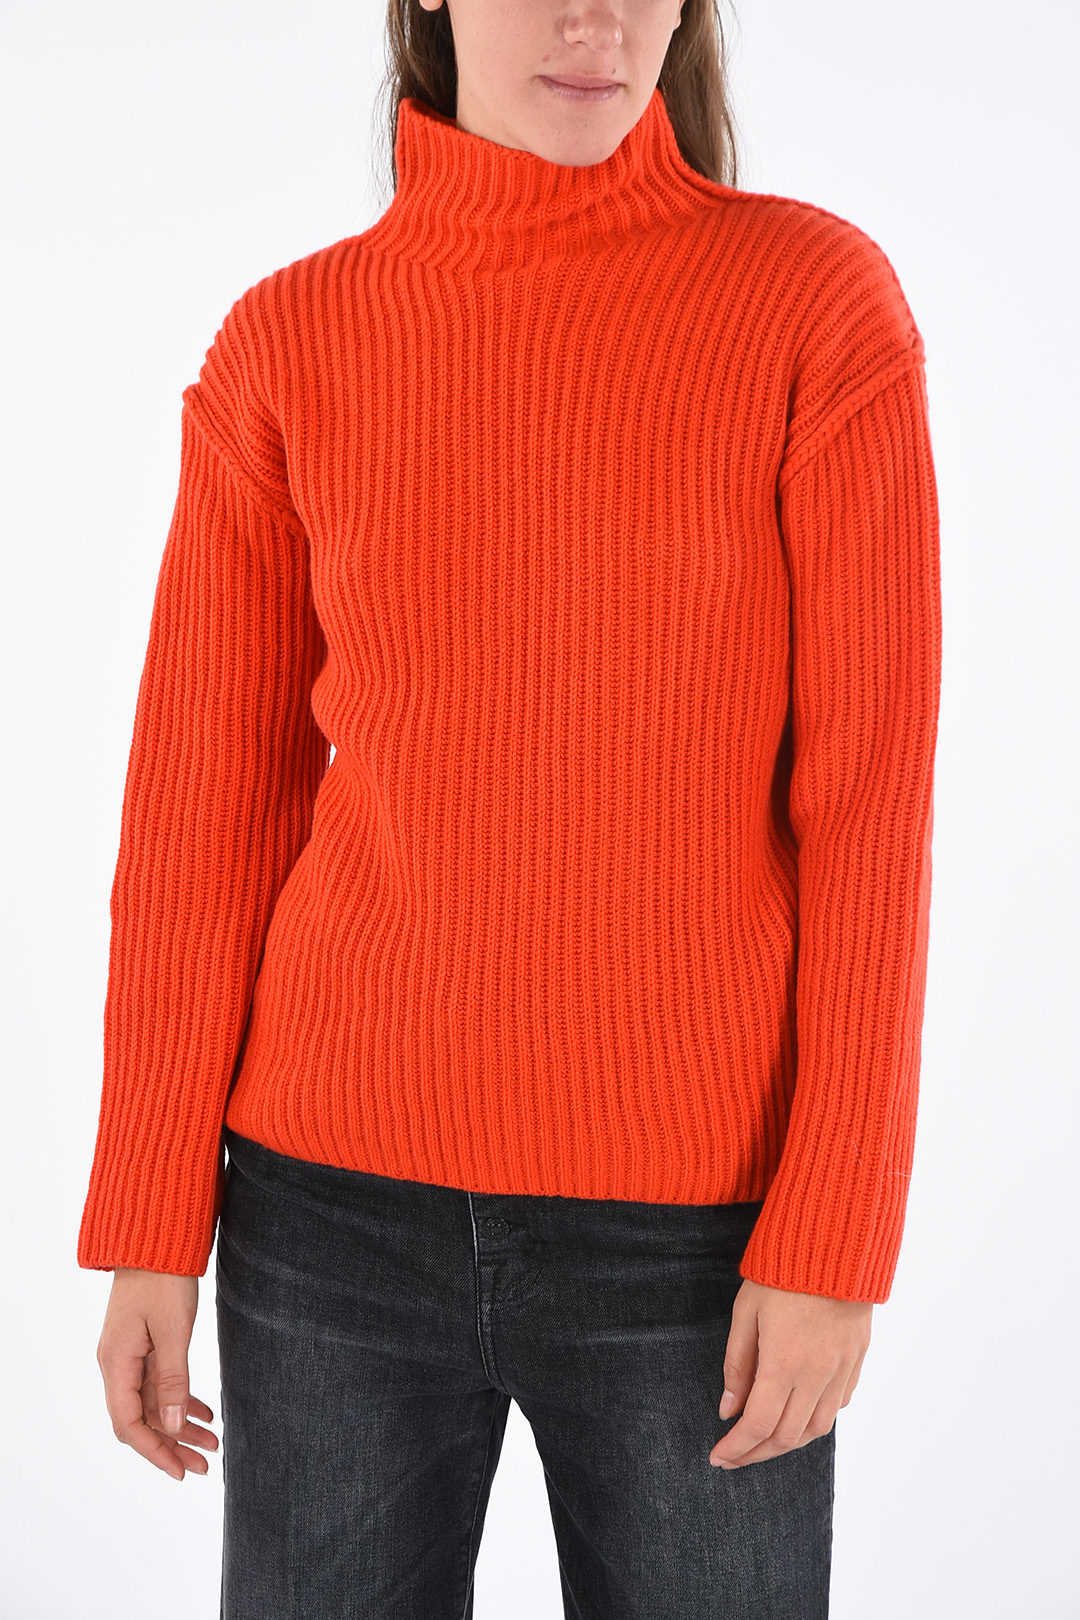 Tory Burch Wool and Cashmere crochet turtle-neck sweater women ...